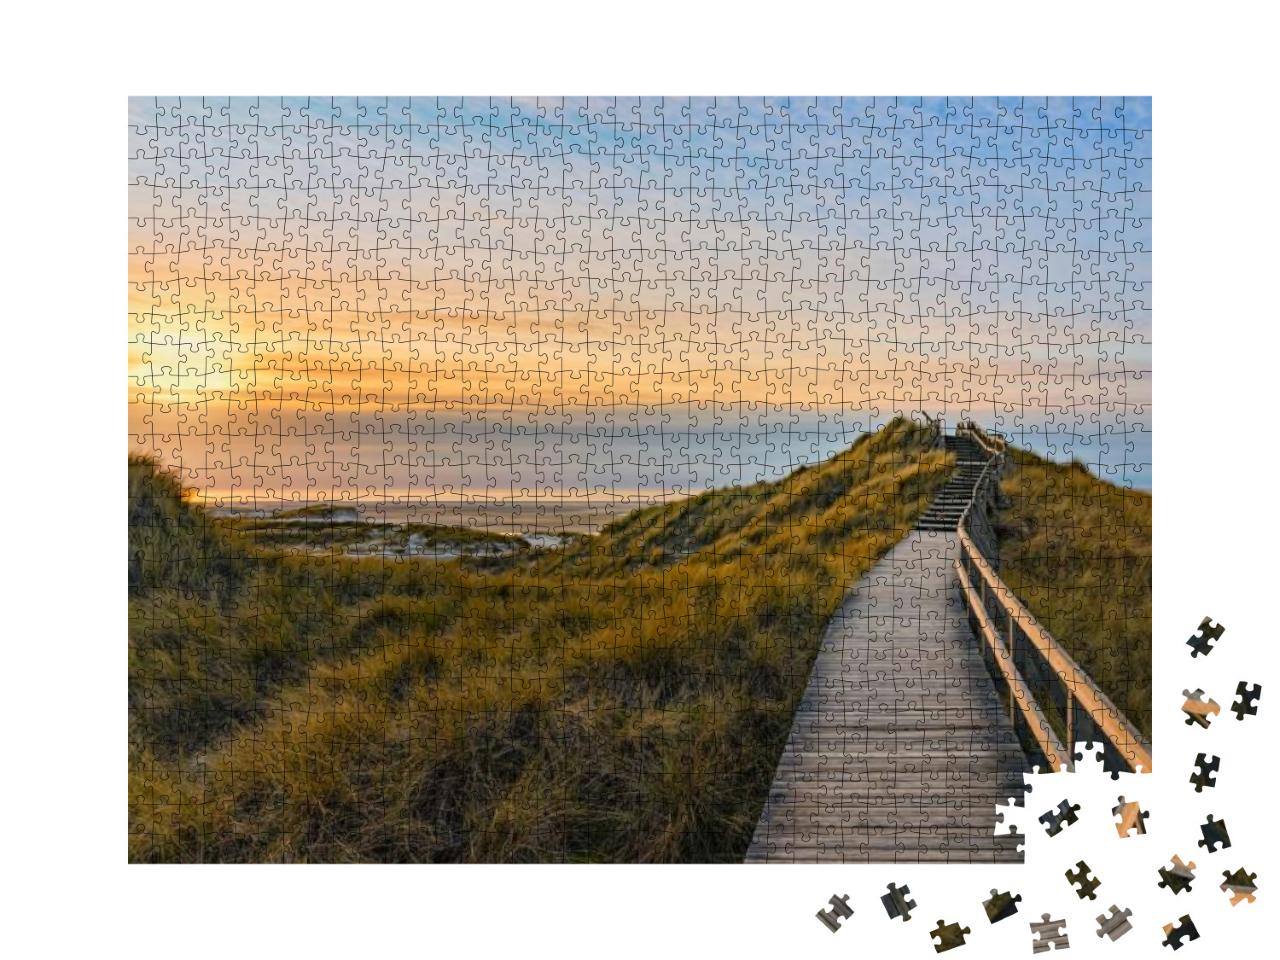 Wooden Footpath & Stairs Crossing the Dunes to the Beach... Jigsaw Puzzle with 1000 pieces